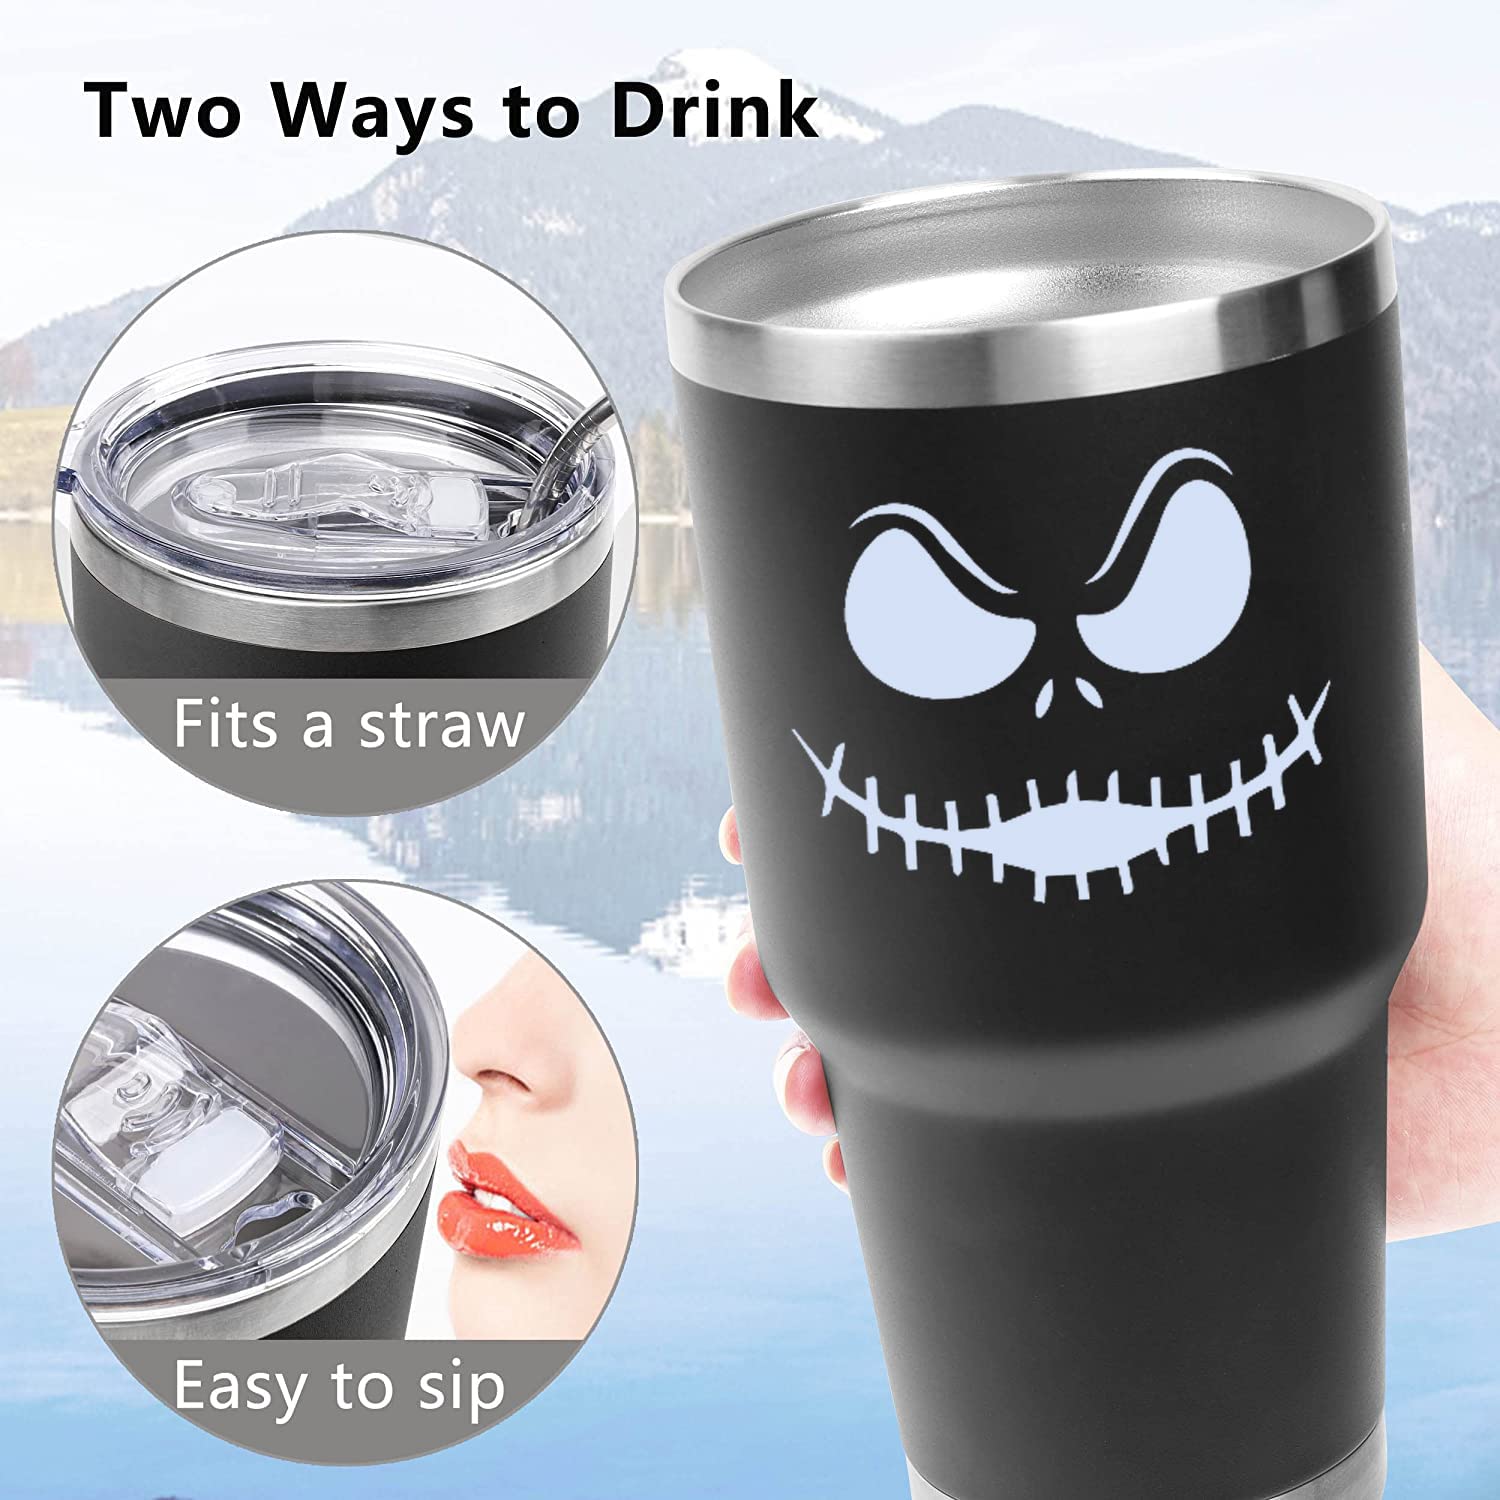 Stainless Steel Three-layer Insulation Cute jack skellington cup 30 oz tumbler with Lid and Straws travel mugs funny coffee tea cups for MenWomen boyfriend gifts (Black)